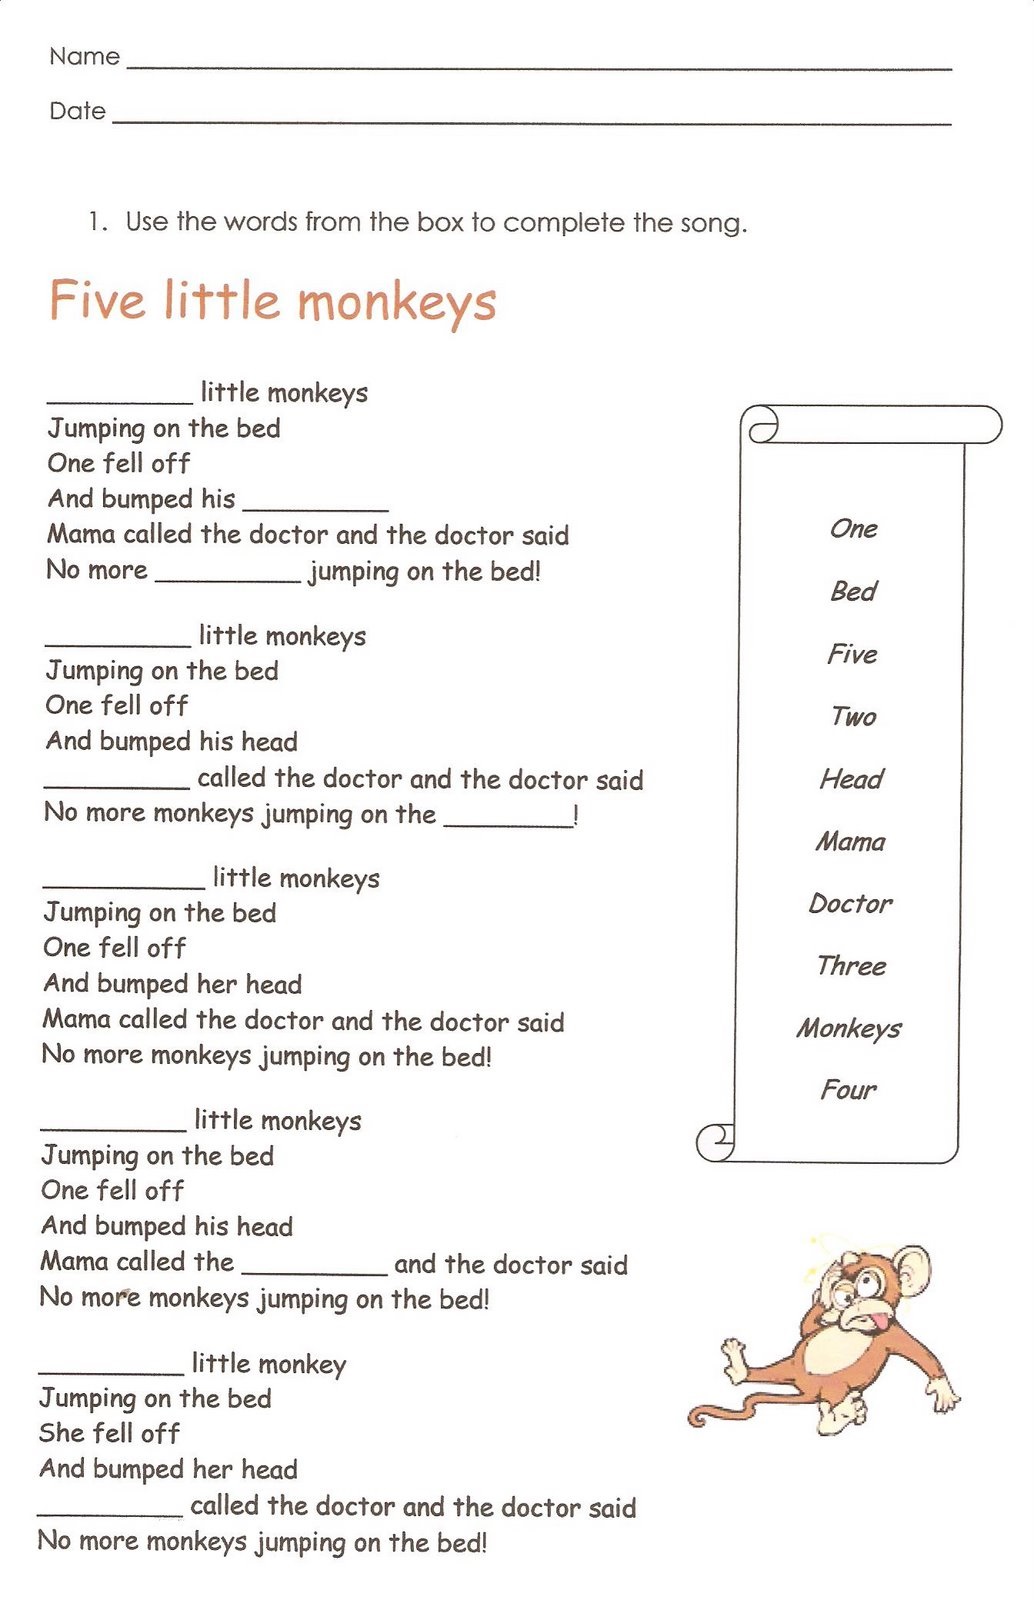 grade-1-english-worksheets-alphabet-2nd-grade-english-worksheets-best-coloring-pages-for